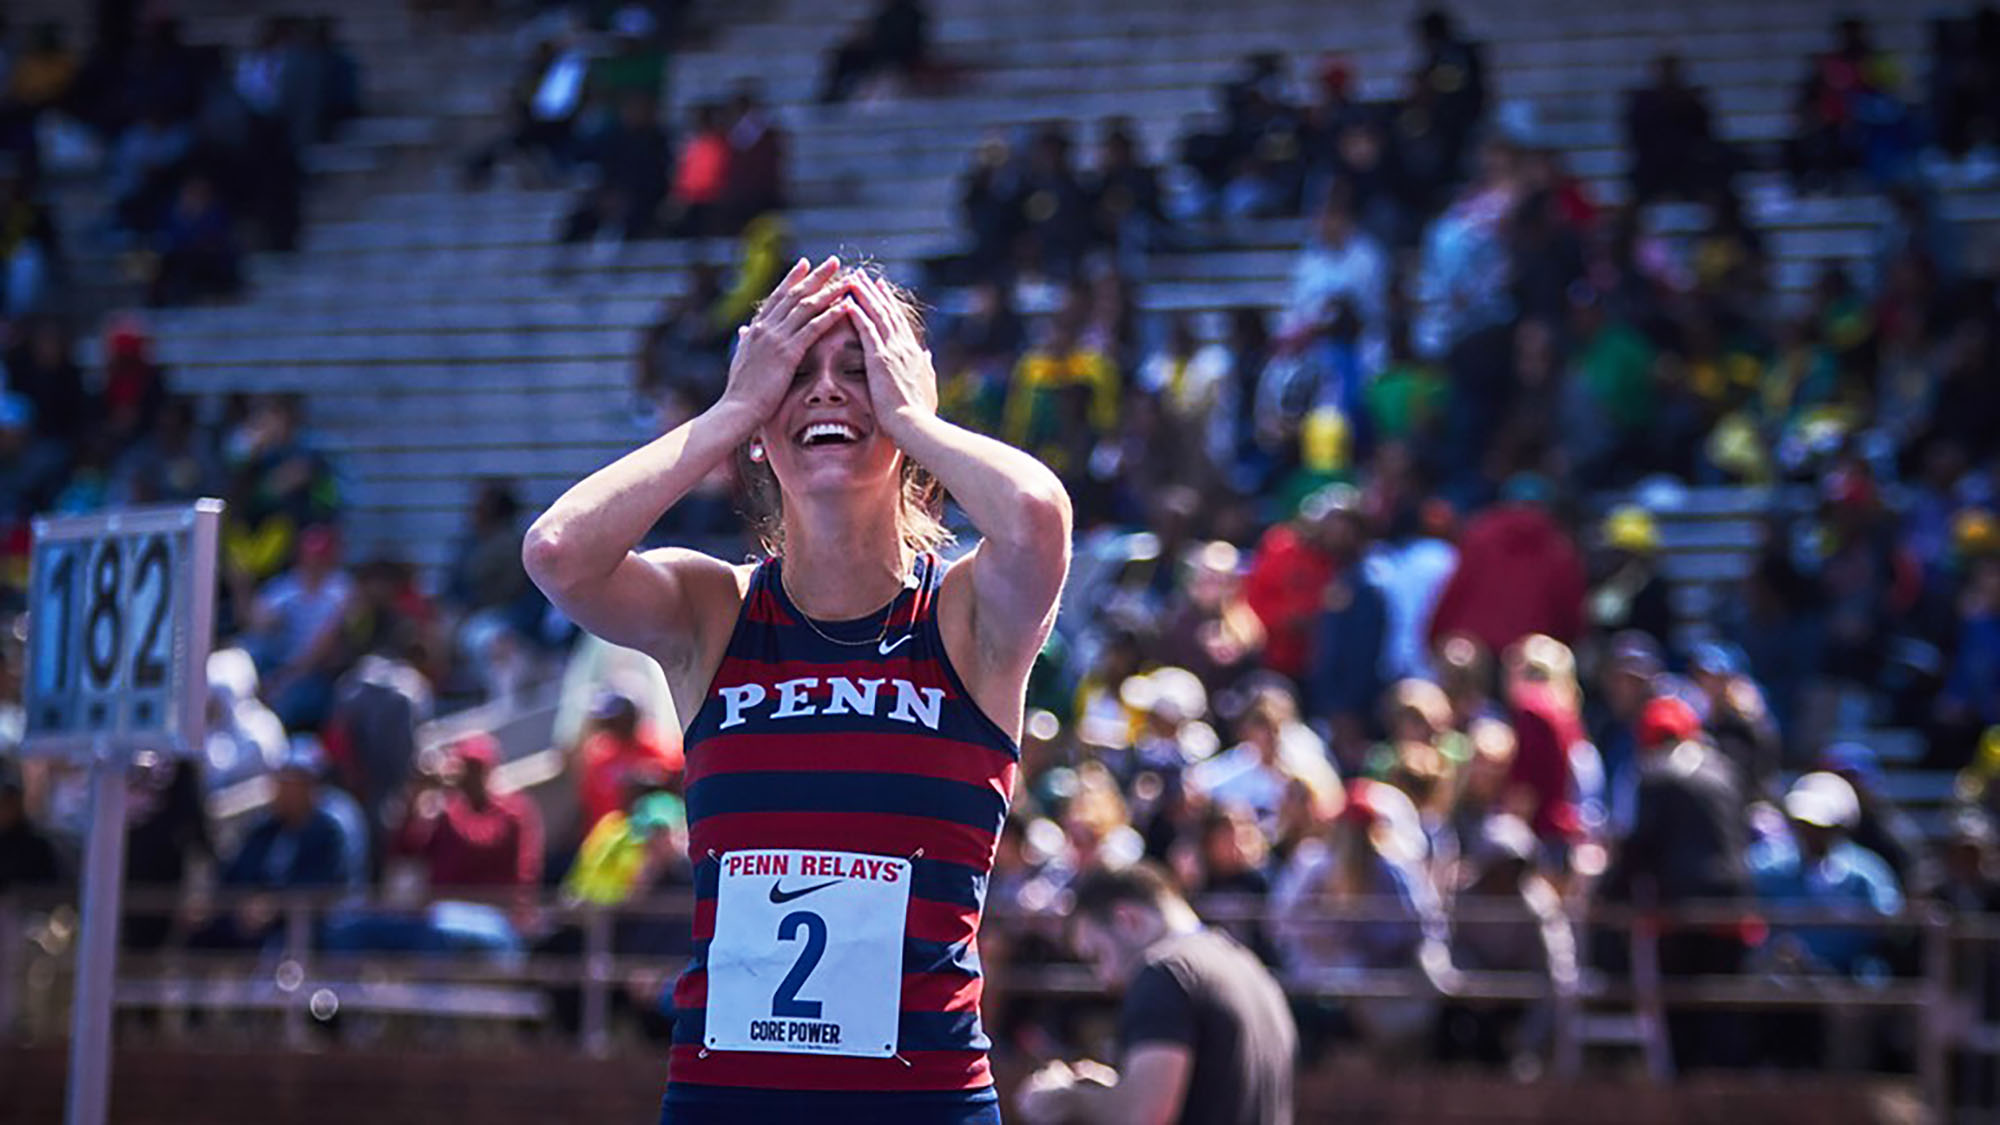 Penn track and field